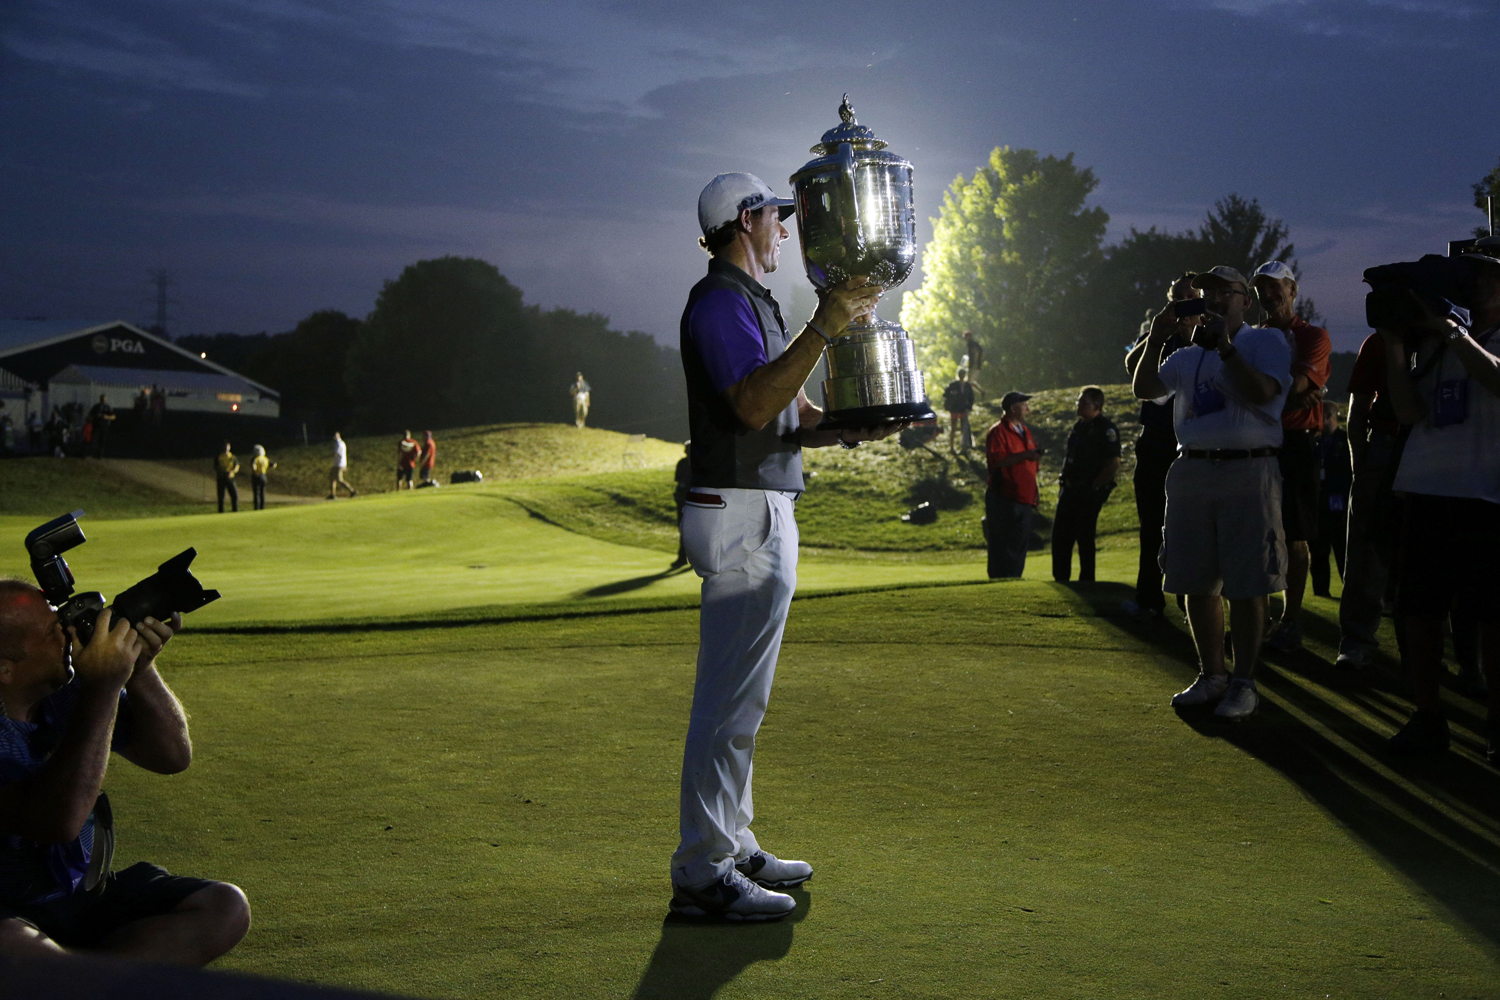 Aug. 10, 2014. Rory McIlroy, of Northern Ireland, holds up the Wanamaker Trophy after winning the PGA Championship golf tournament at Valhalla Golf Club on Sunday, Aug. 10, 2014, in Louisville, Ky.